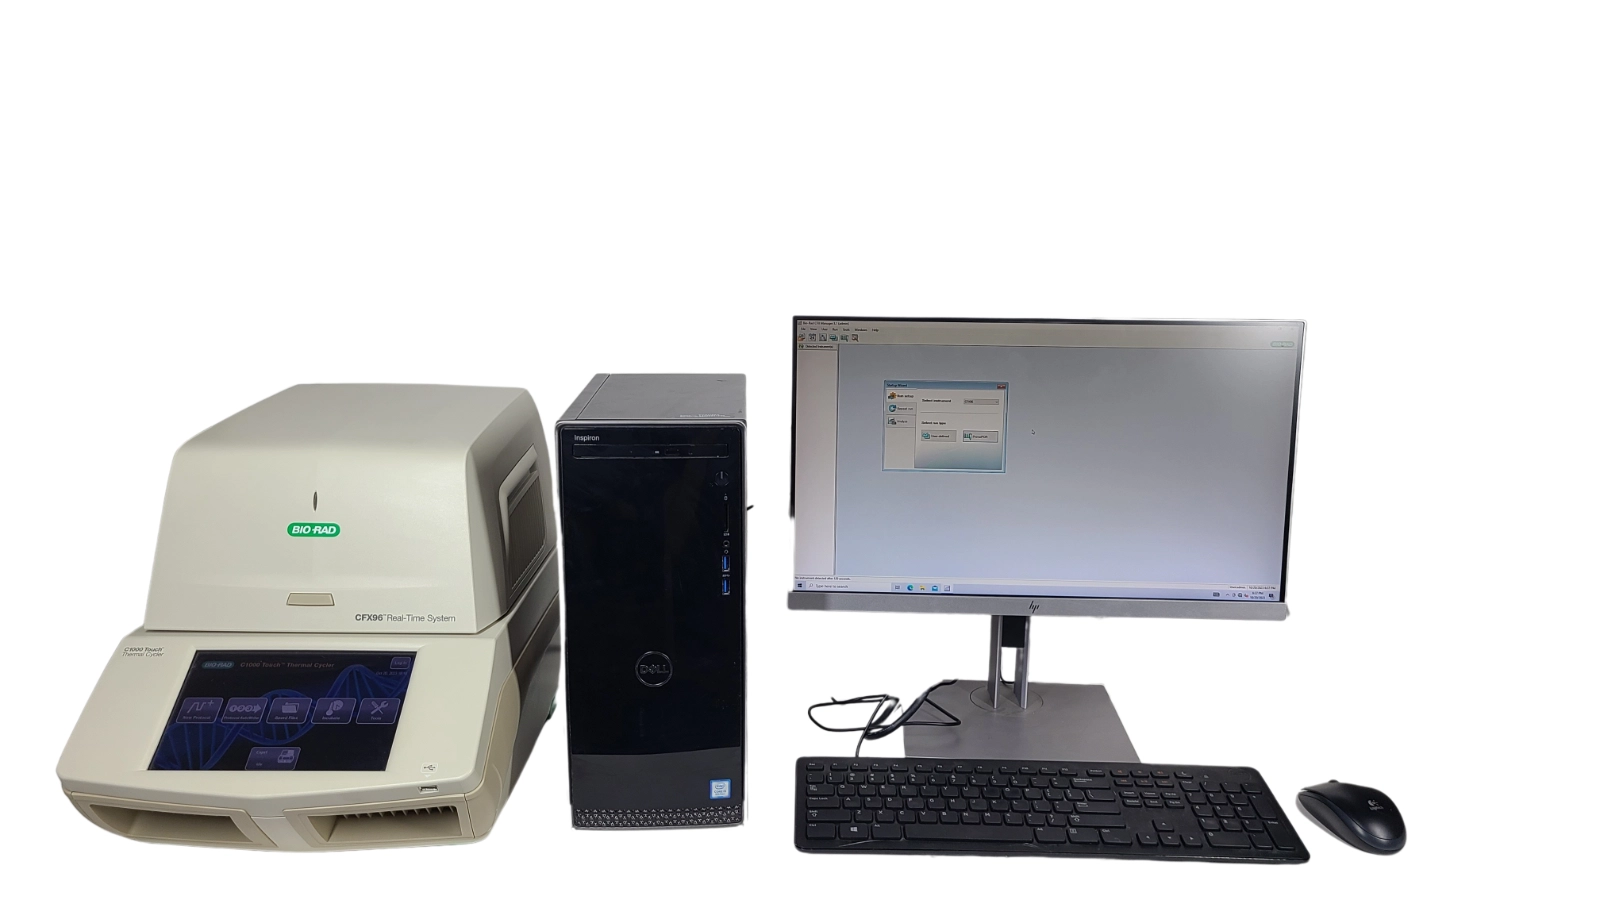 BioRad CFX Connect Real-Time PCR Detection System